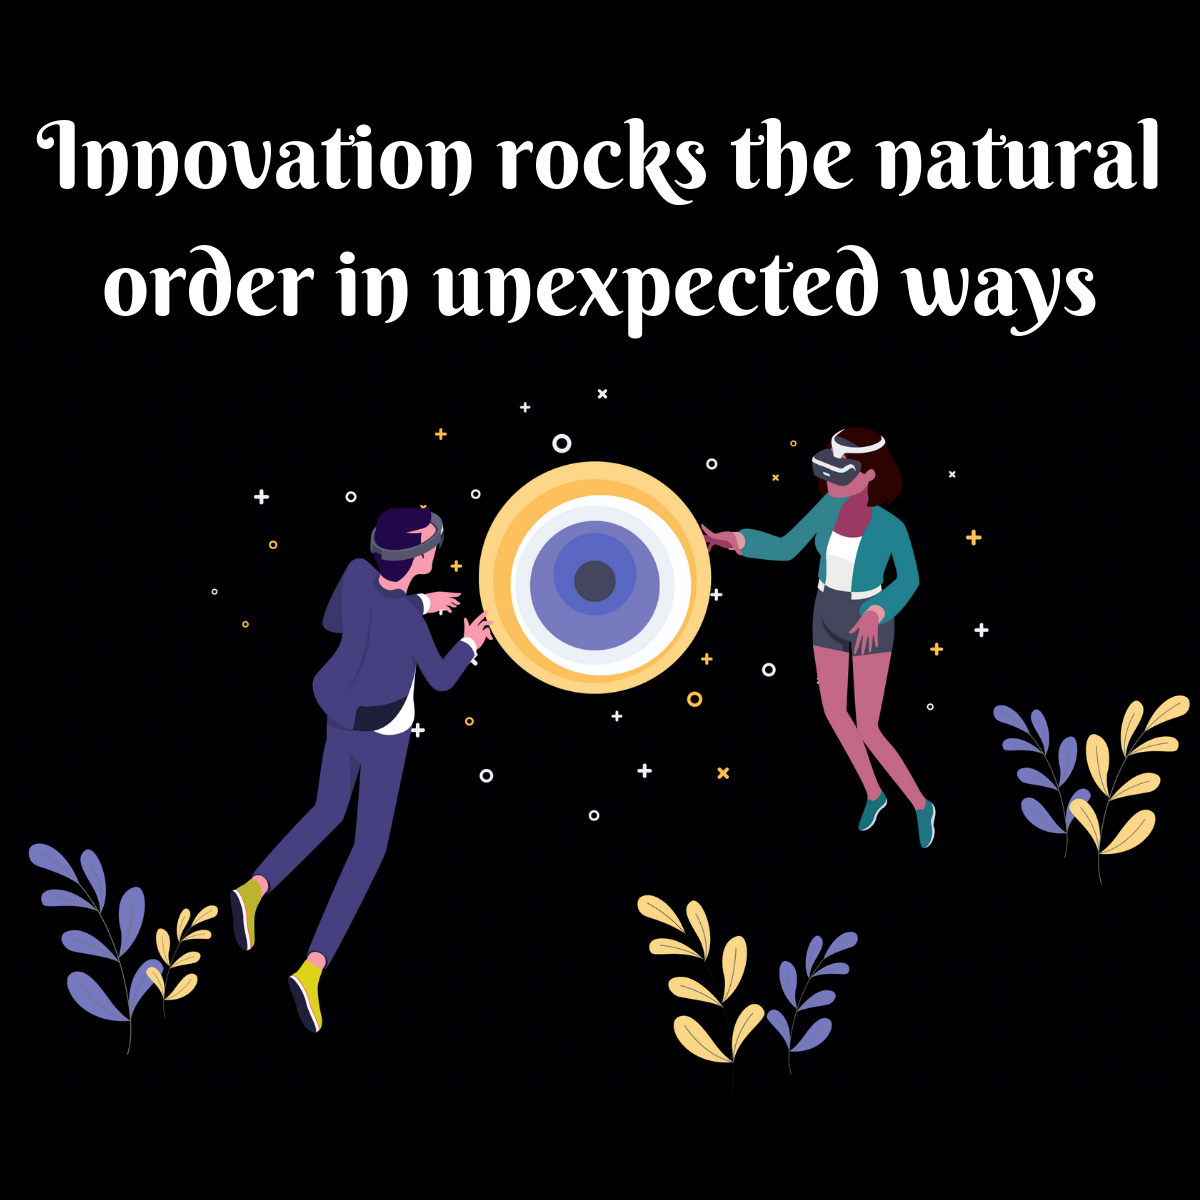 Innovation rocks the natural order in unexpected ways